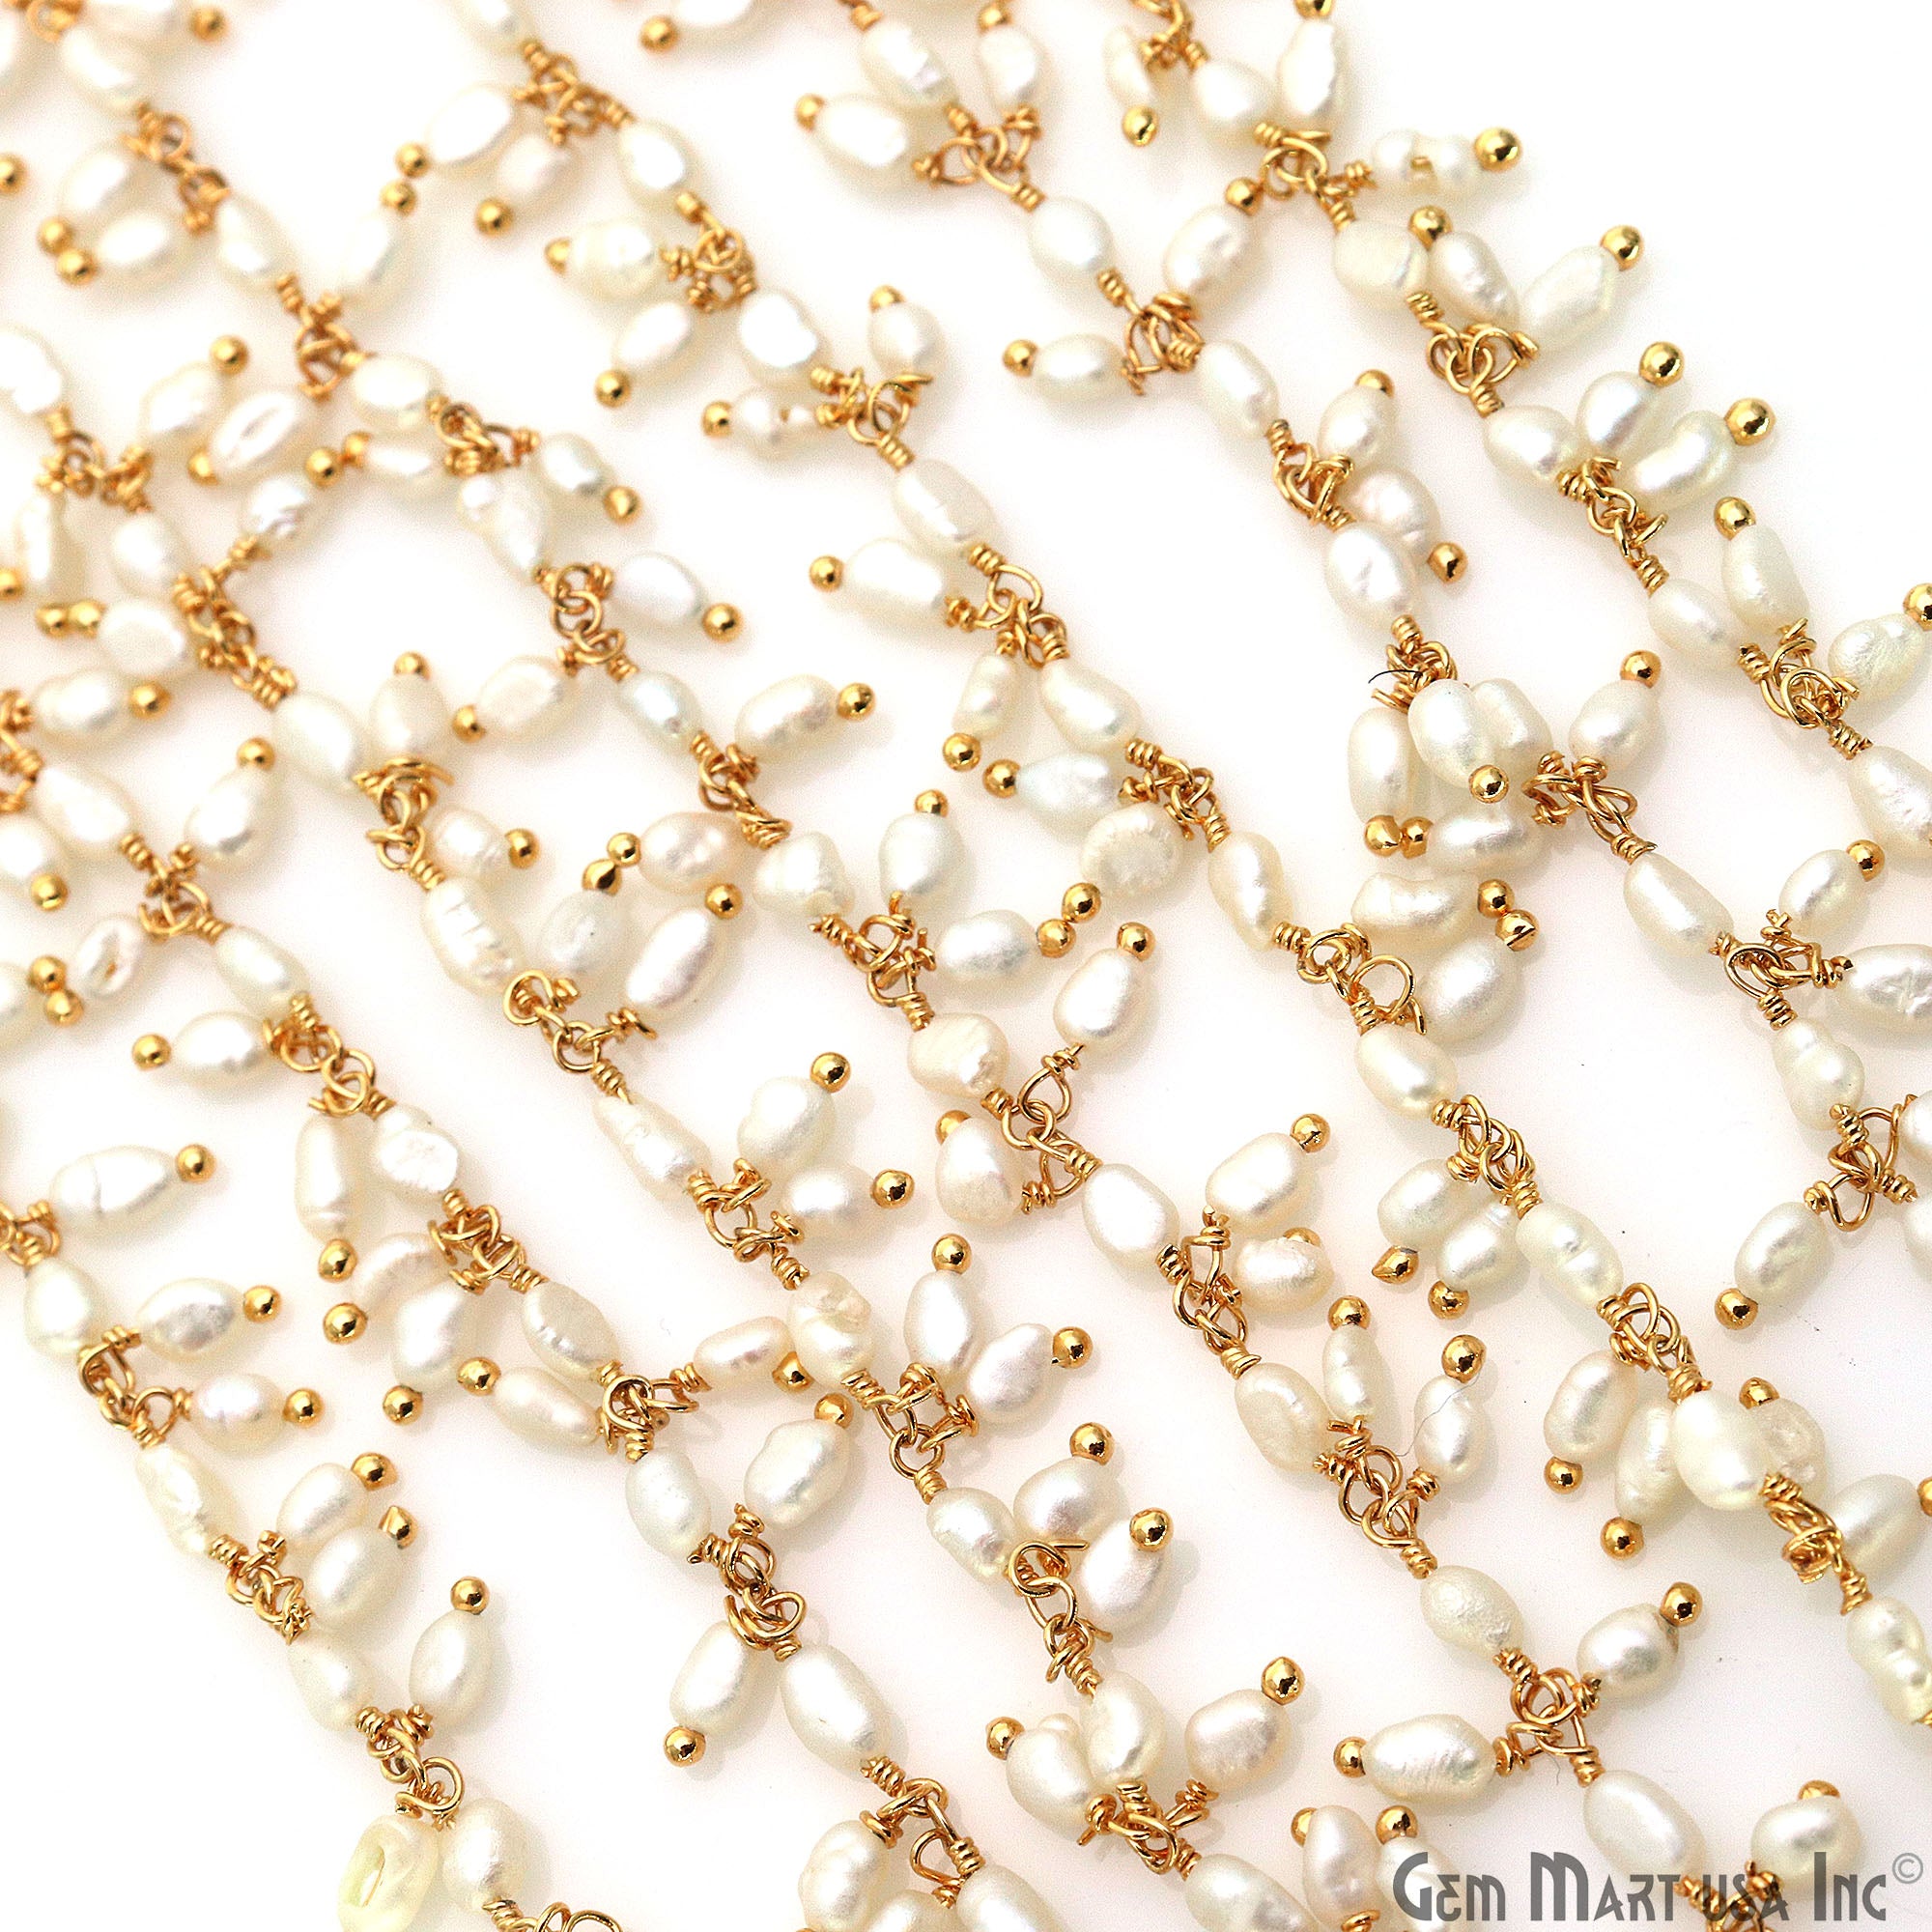 Pearl Faceted Beads Oval 4x3mm Gold Plated Wire Wrapped Cluster Rosary Chain